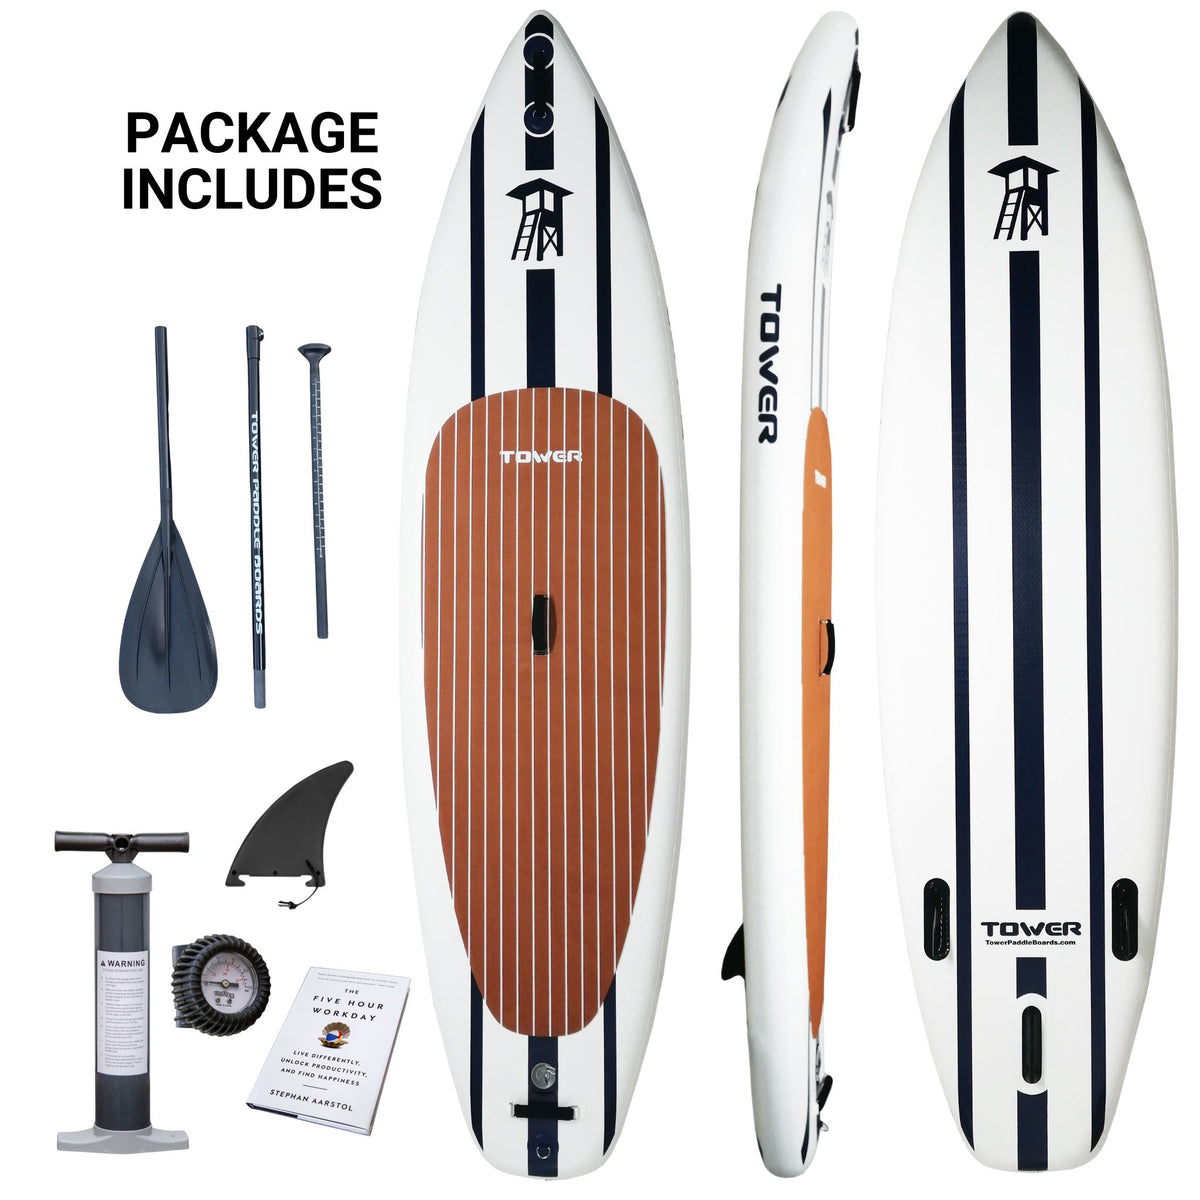 Yachtsman Inflatable Paddle for Sale at SUP – Tower Paddle Boards